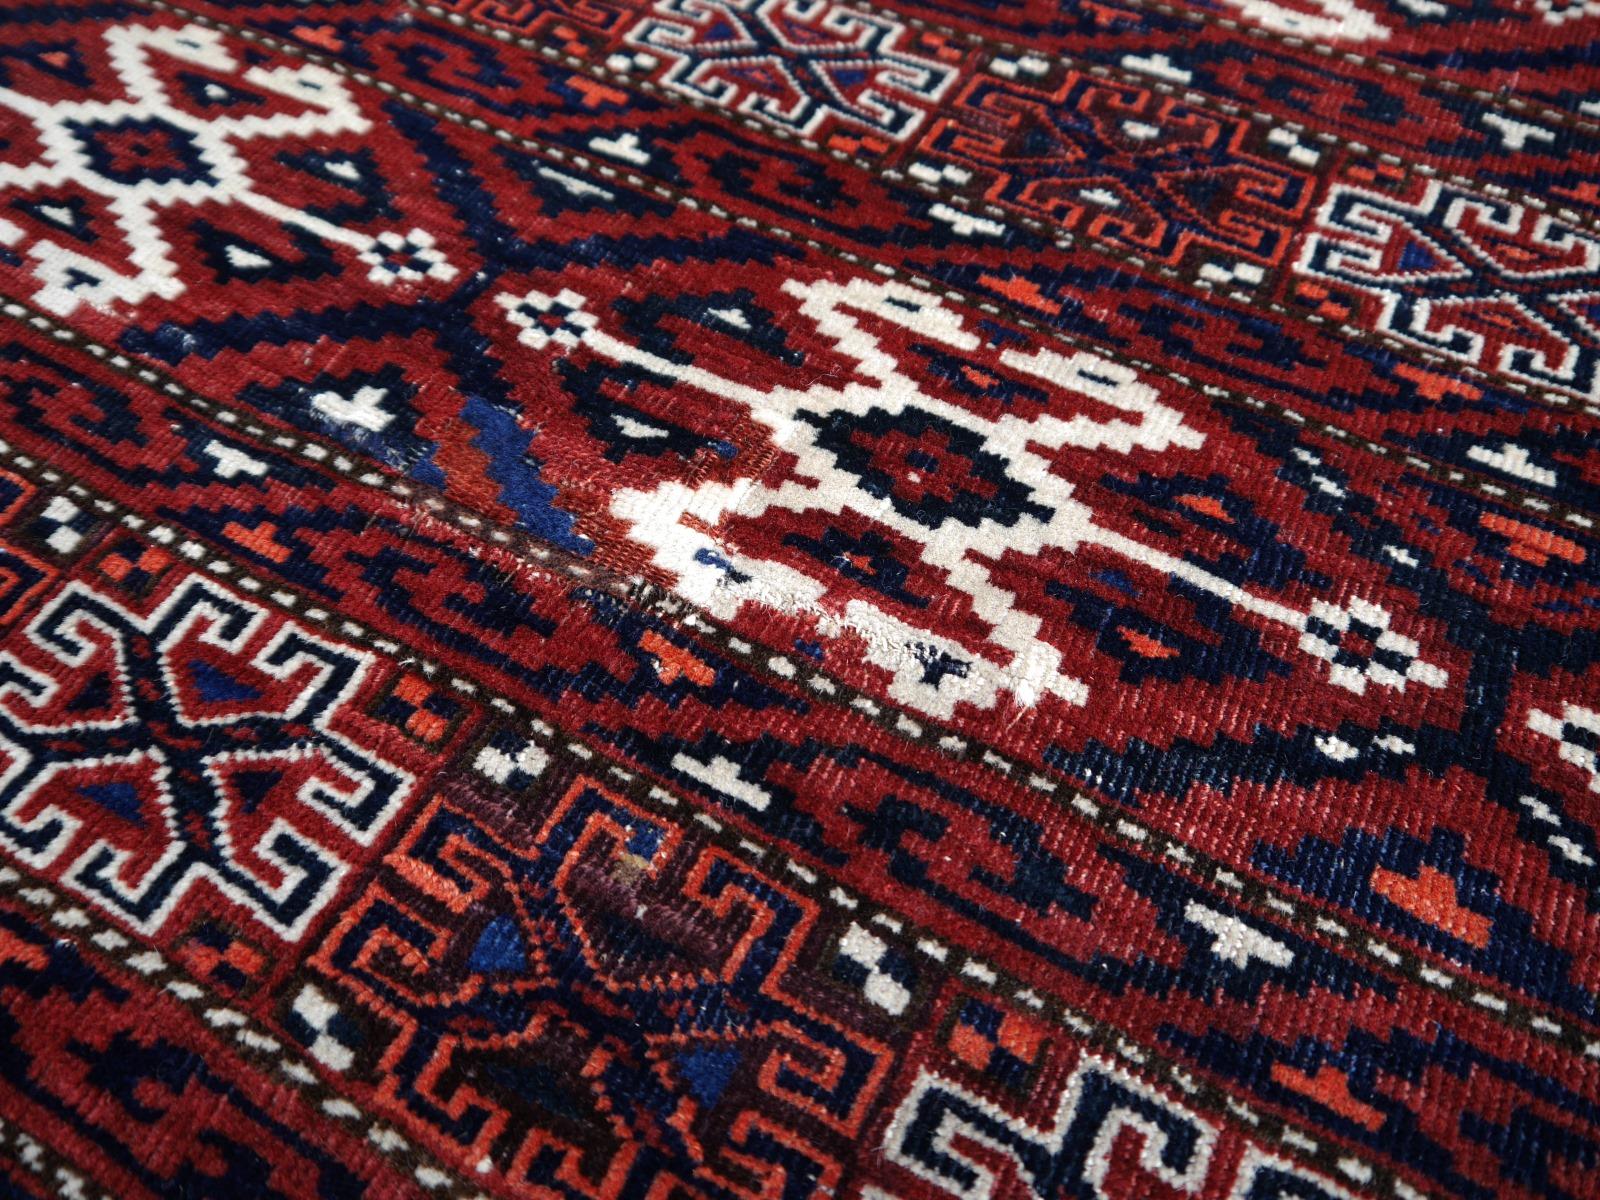 Yomud Tribeal Turkmen Turkoman Antique Rug with Ram Motive Hand Knotted Carpet For Sale 3